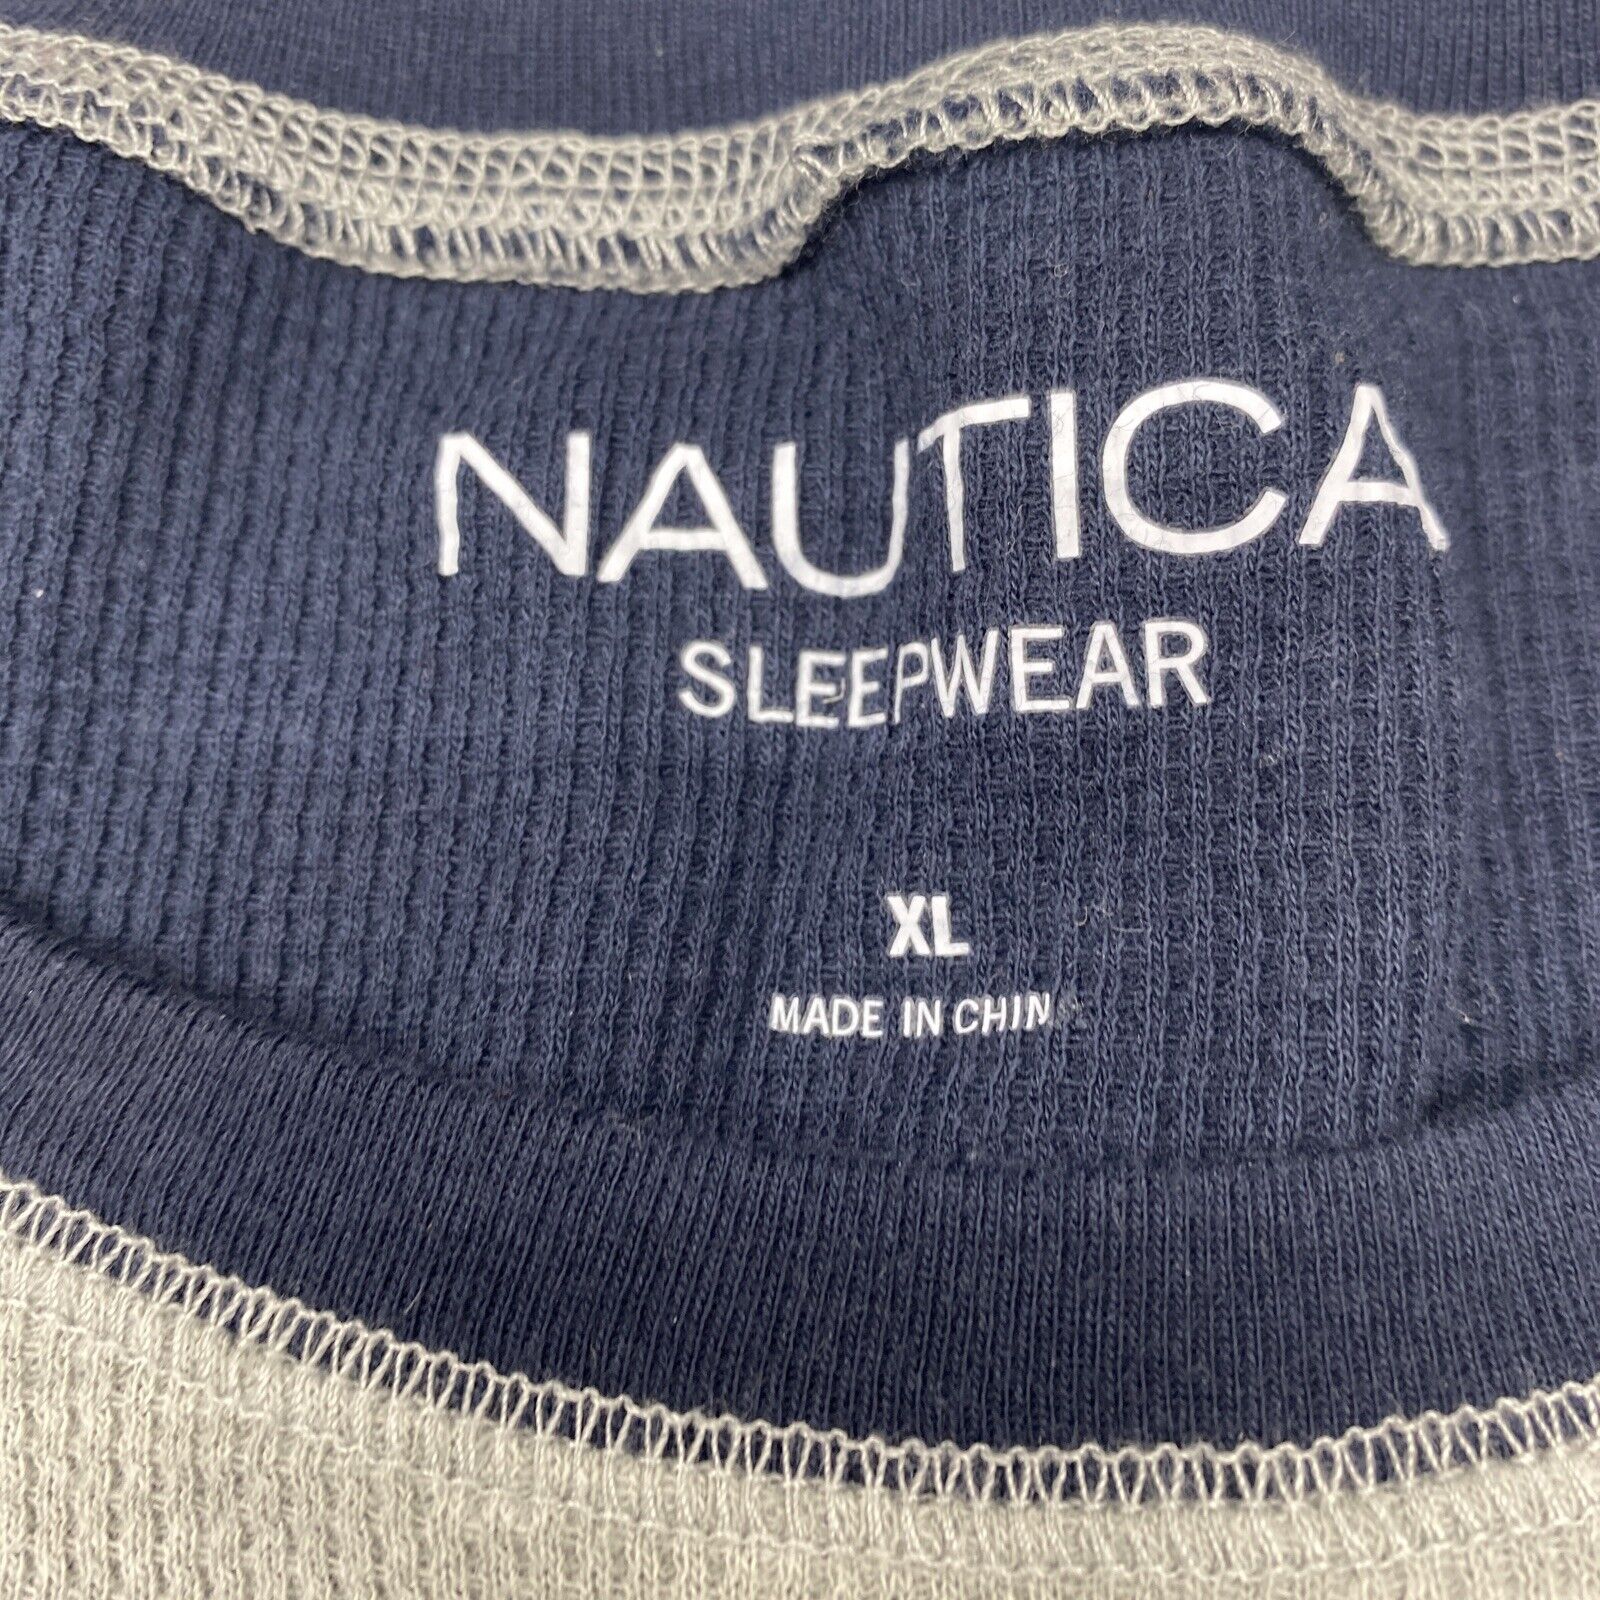 Nautica Men's Sleepwear Shirt Short Sleeve Navy Size Large Brand New With  Tags